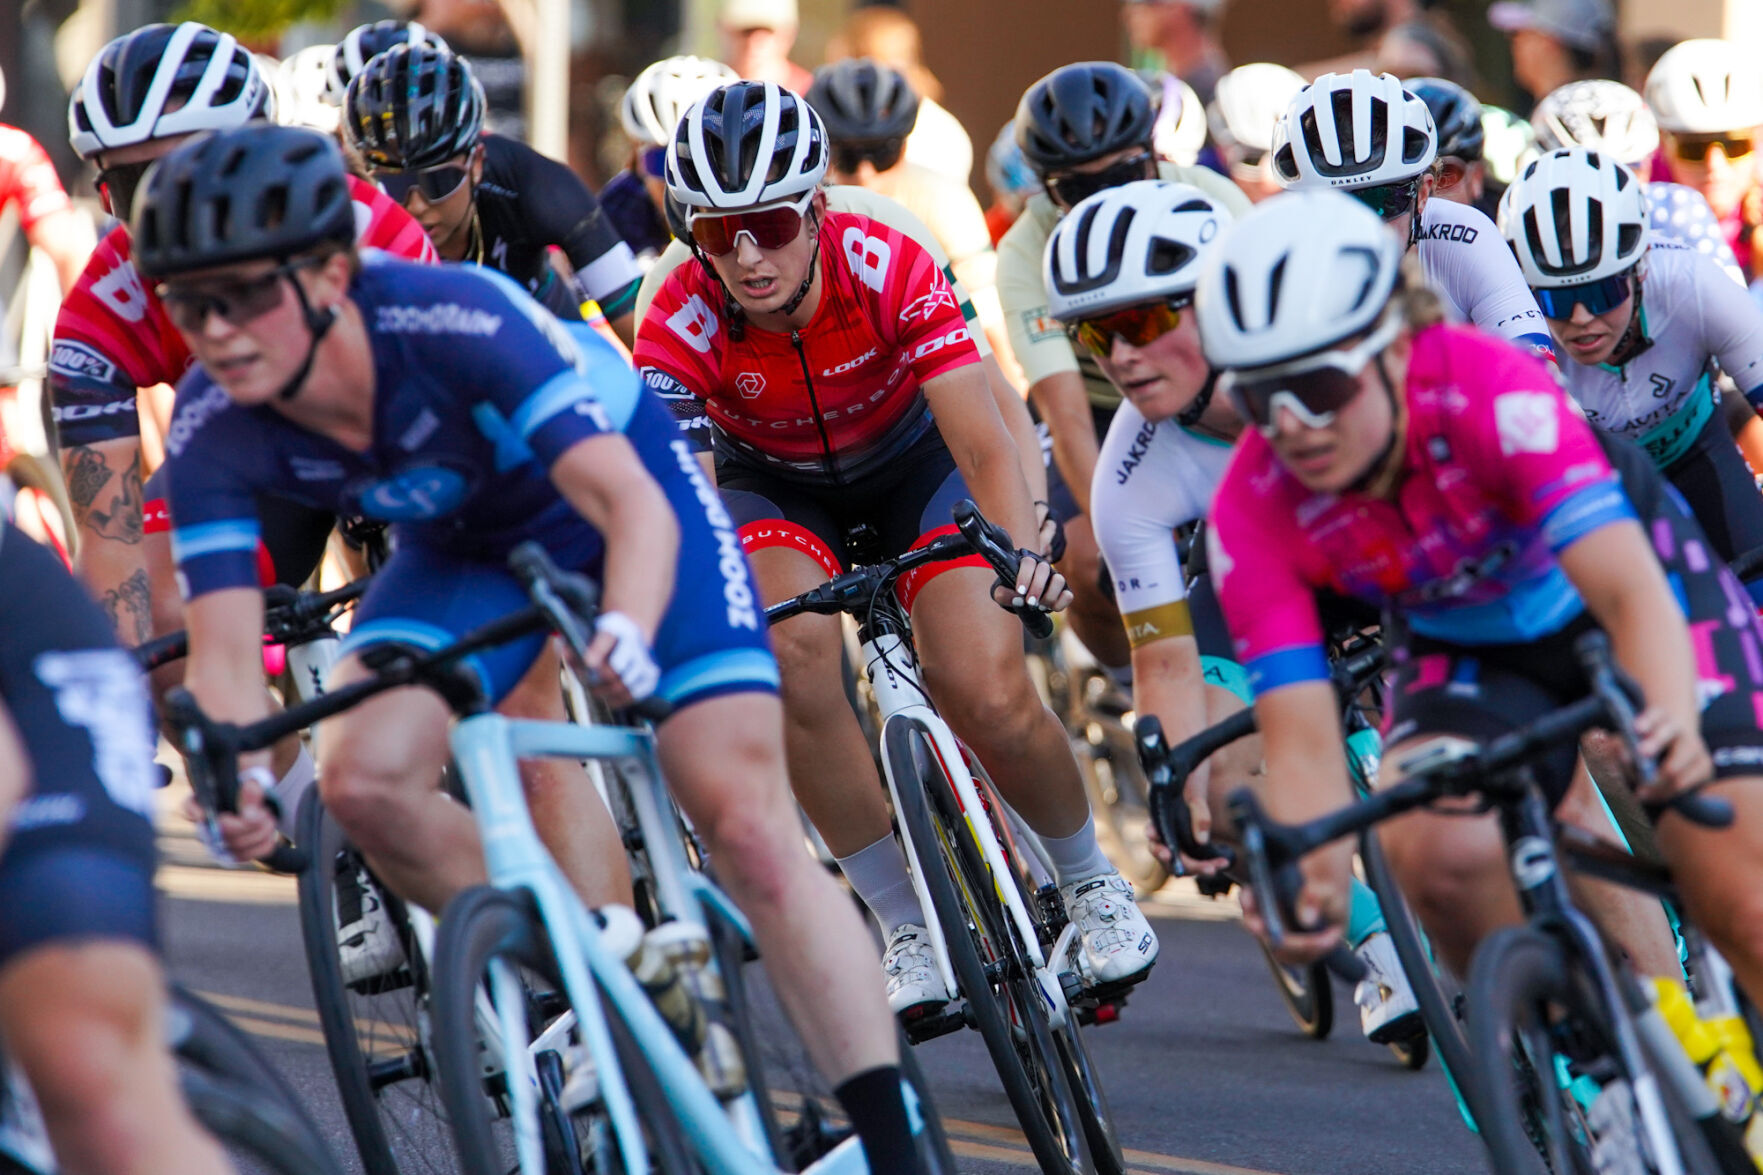 Twilight Criterium race to ride into Boise this weekend Local News idahopress